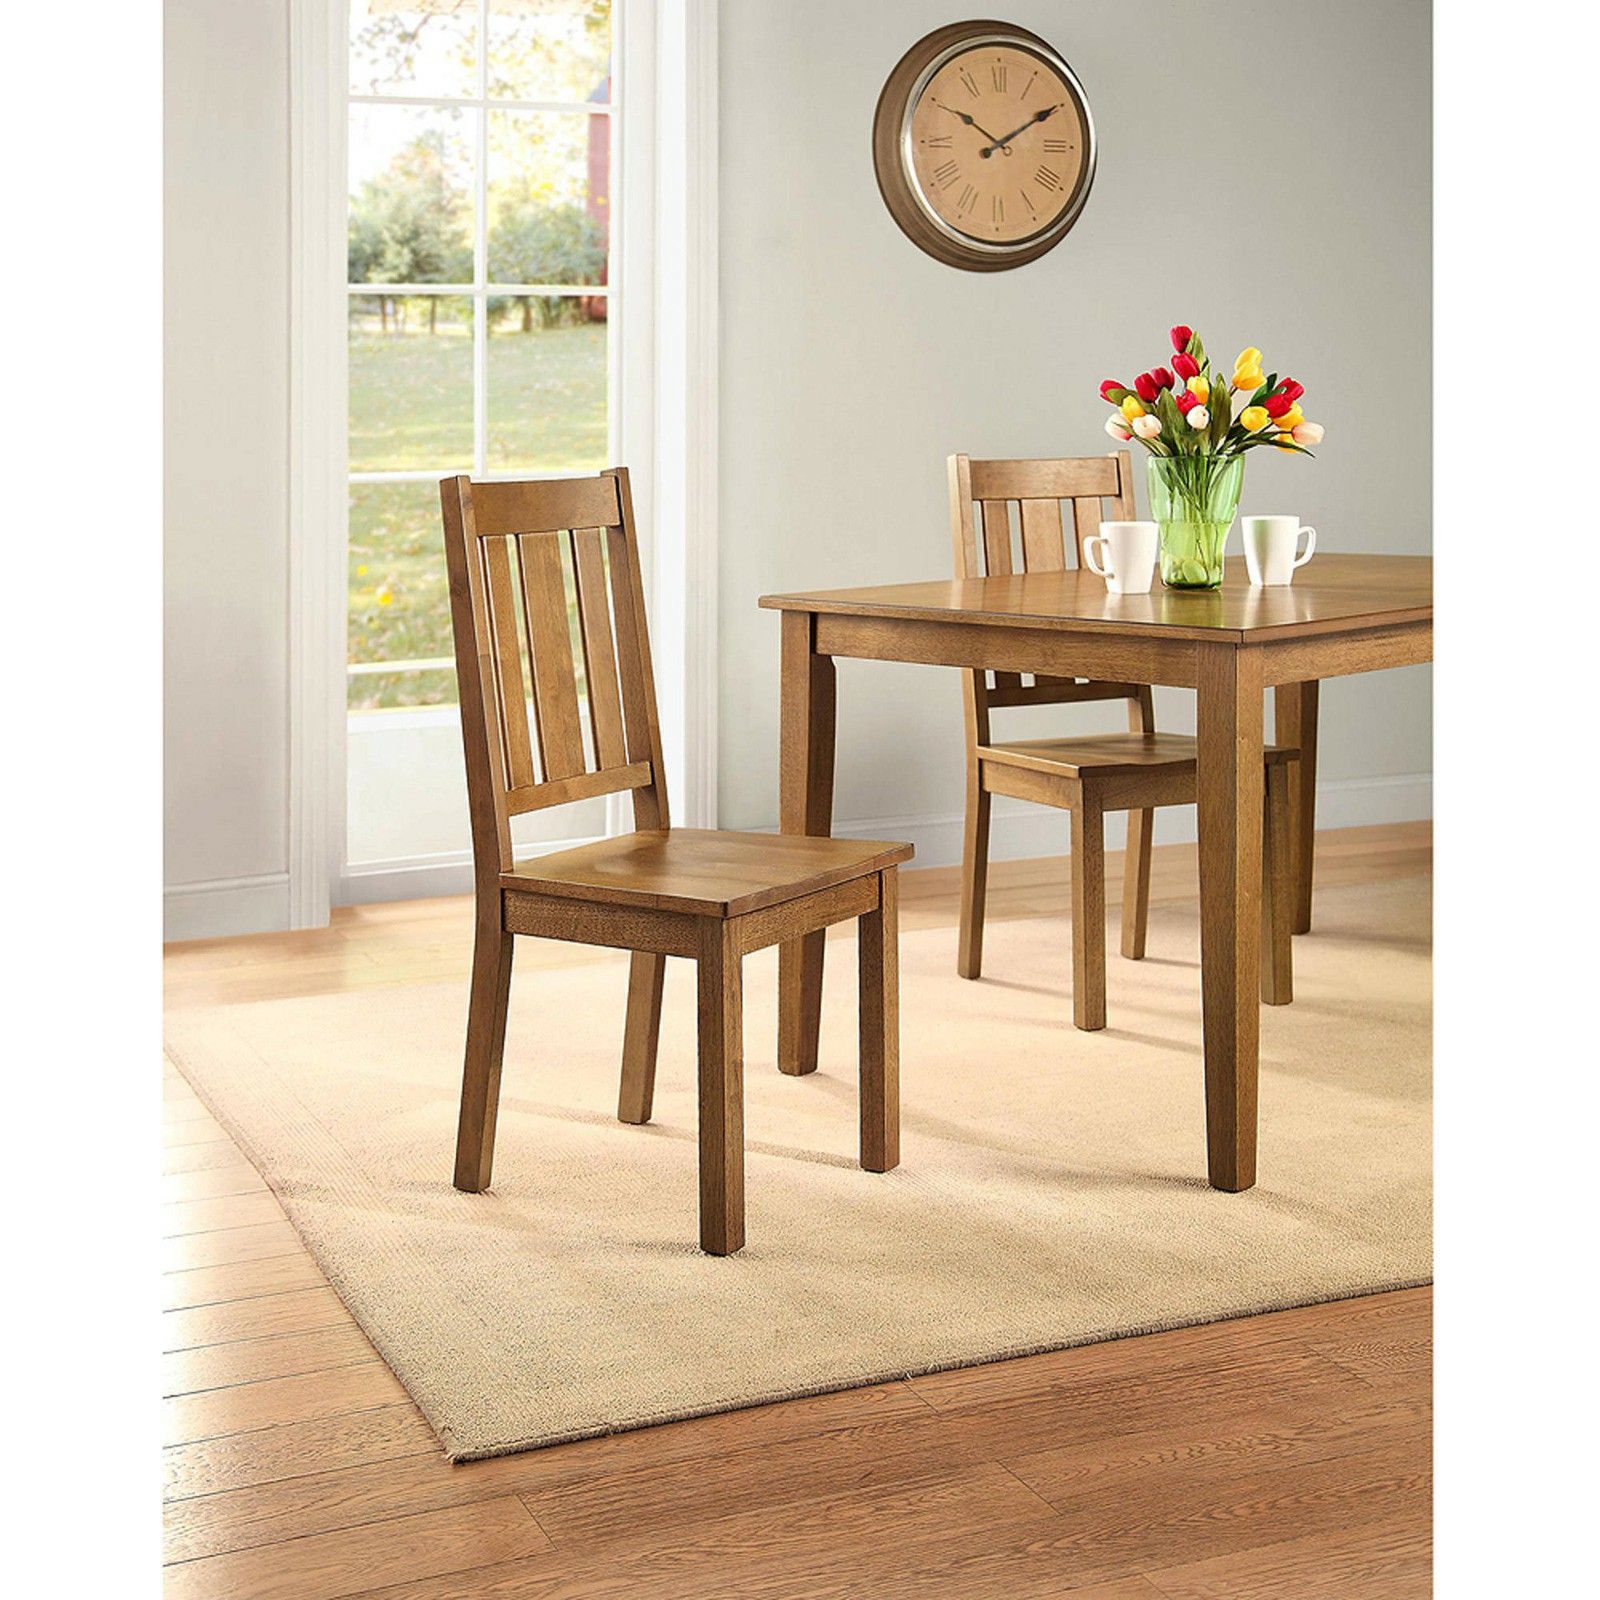 💯💦Better Homes and Gardens Bankston *Dining Chair, Set of 2*, Honey